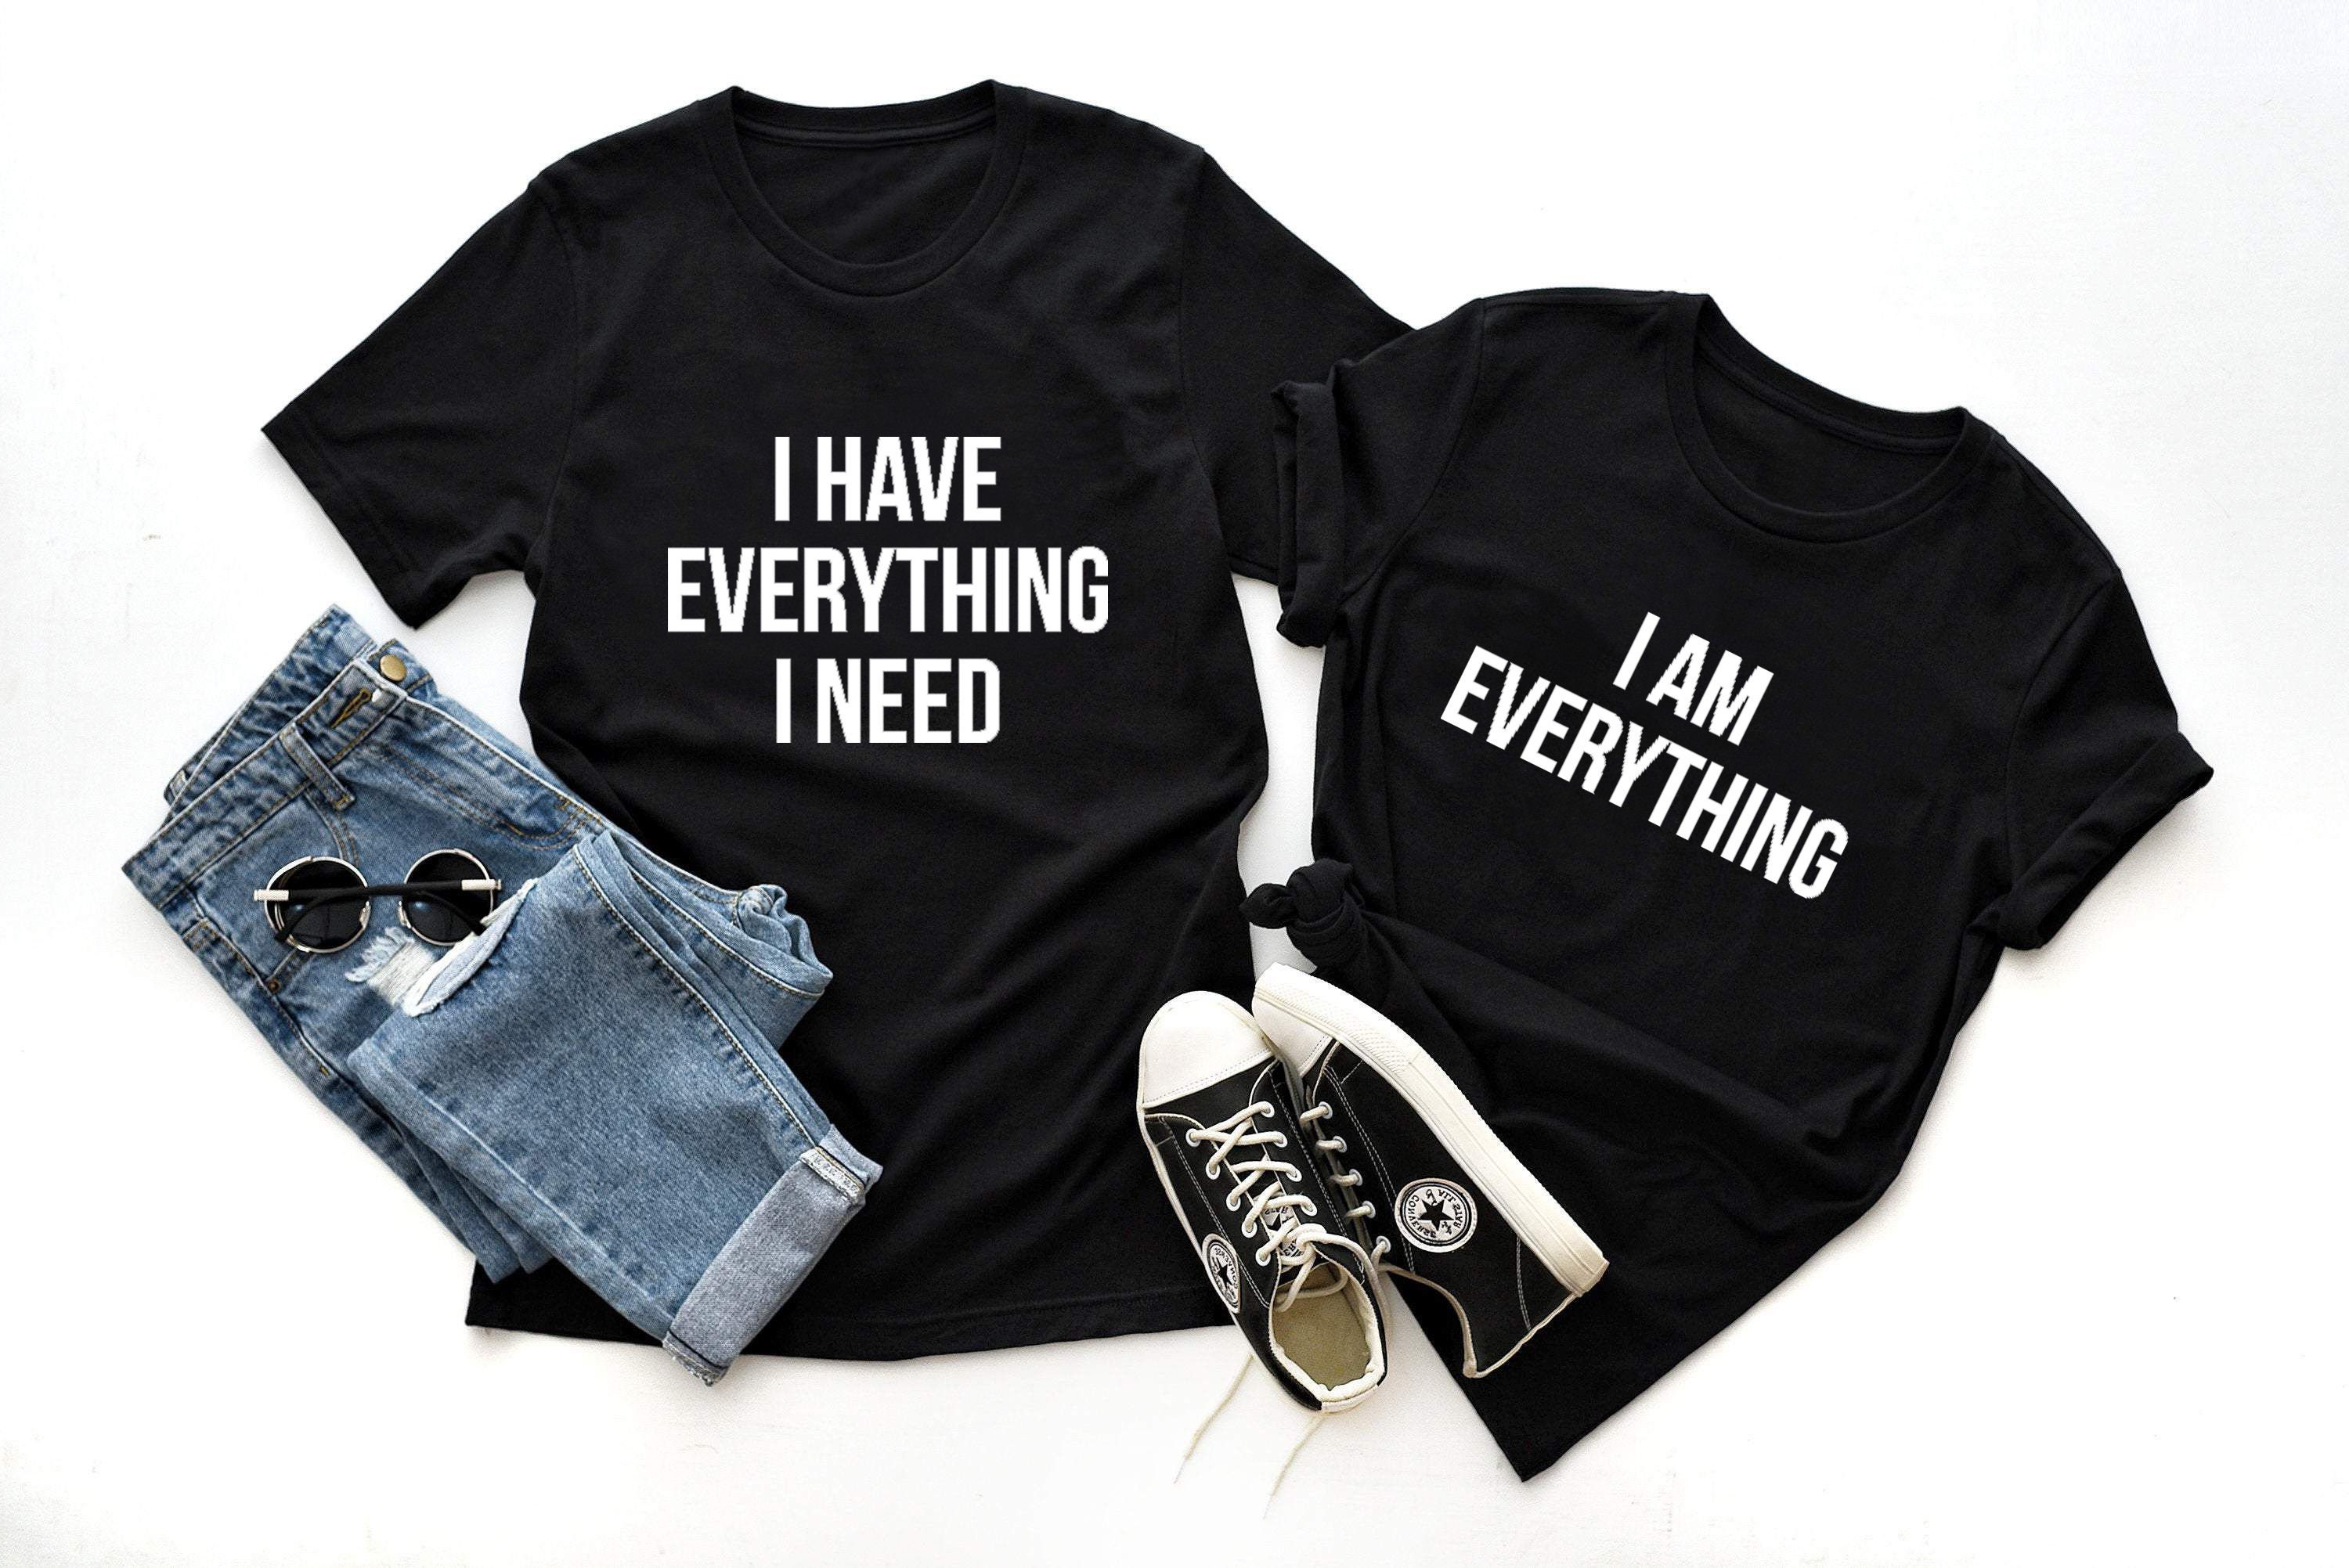 I am Everything shirts for couples I have Everything I need Shirts for couples Matching Tshirts for Couples Husband and Wife Shirts